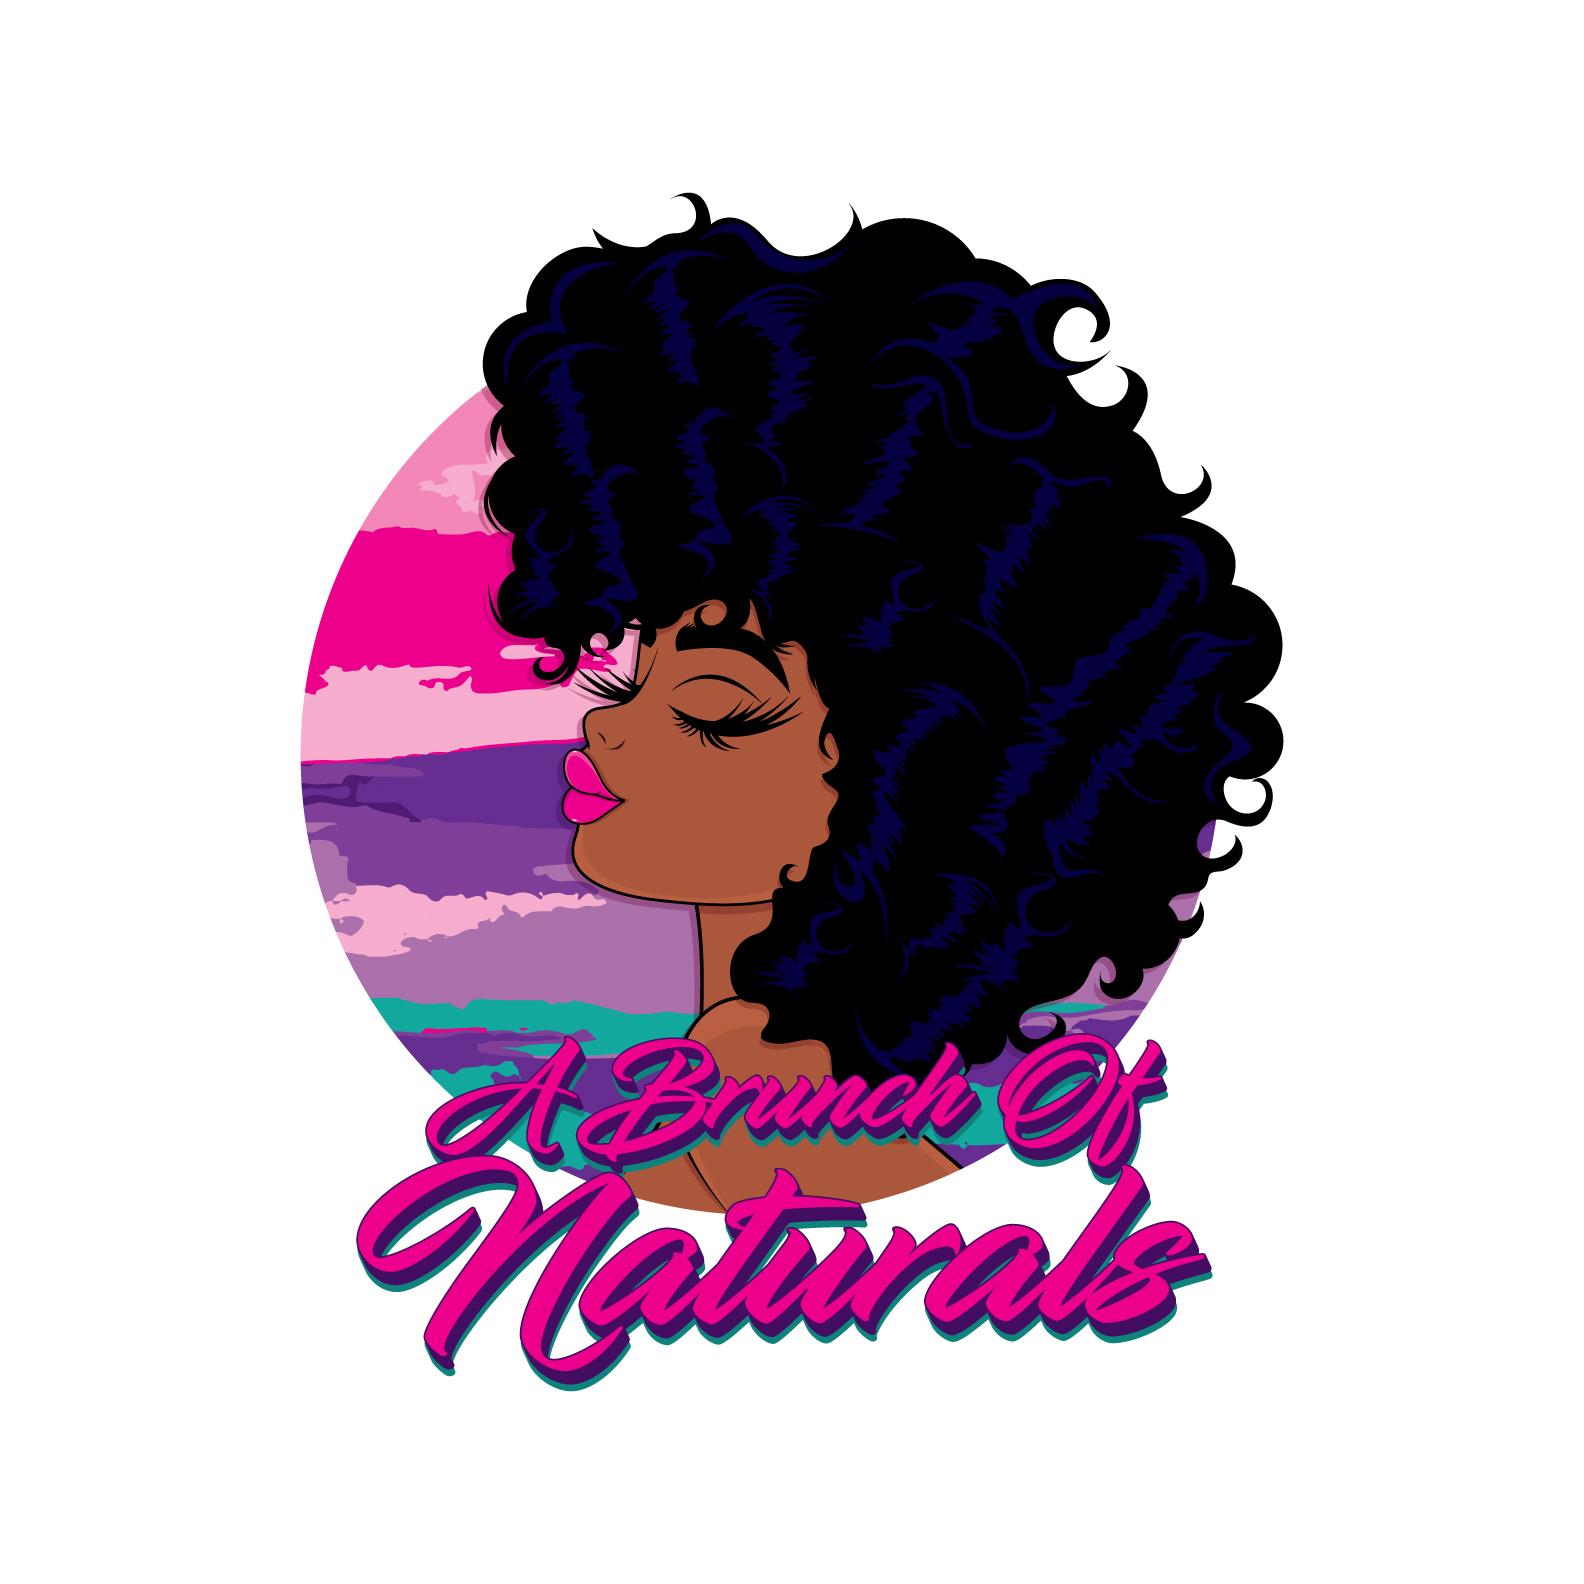 A BRUNCH OF NATURALS 2ND ANNUAL NATURAL HAIR EVENT